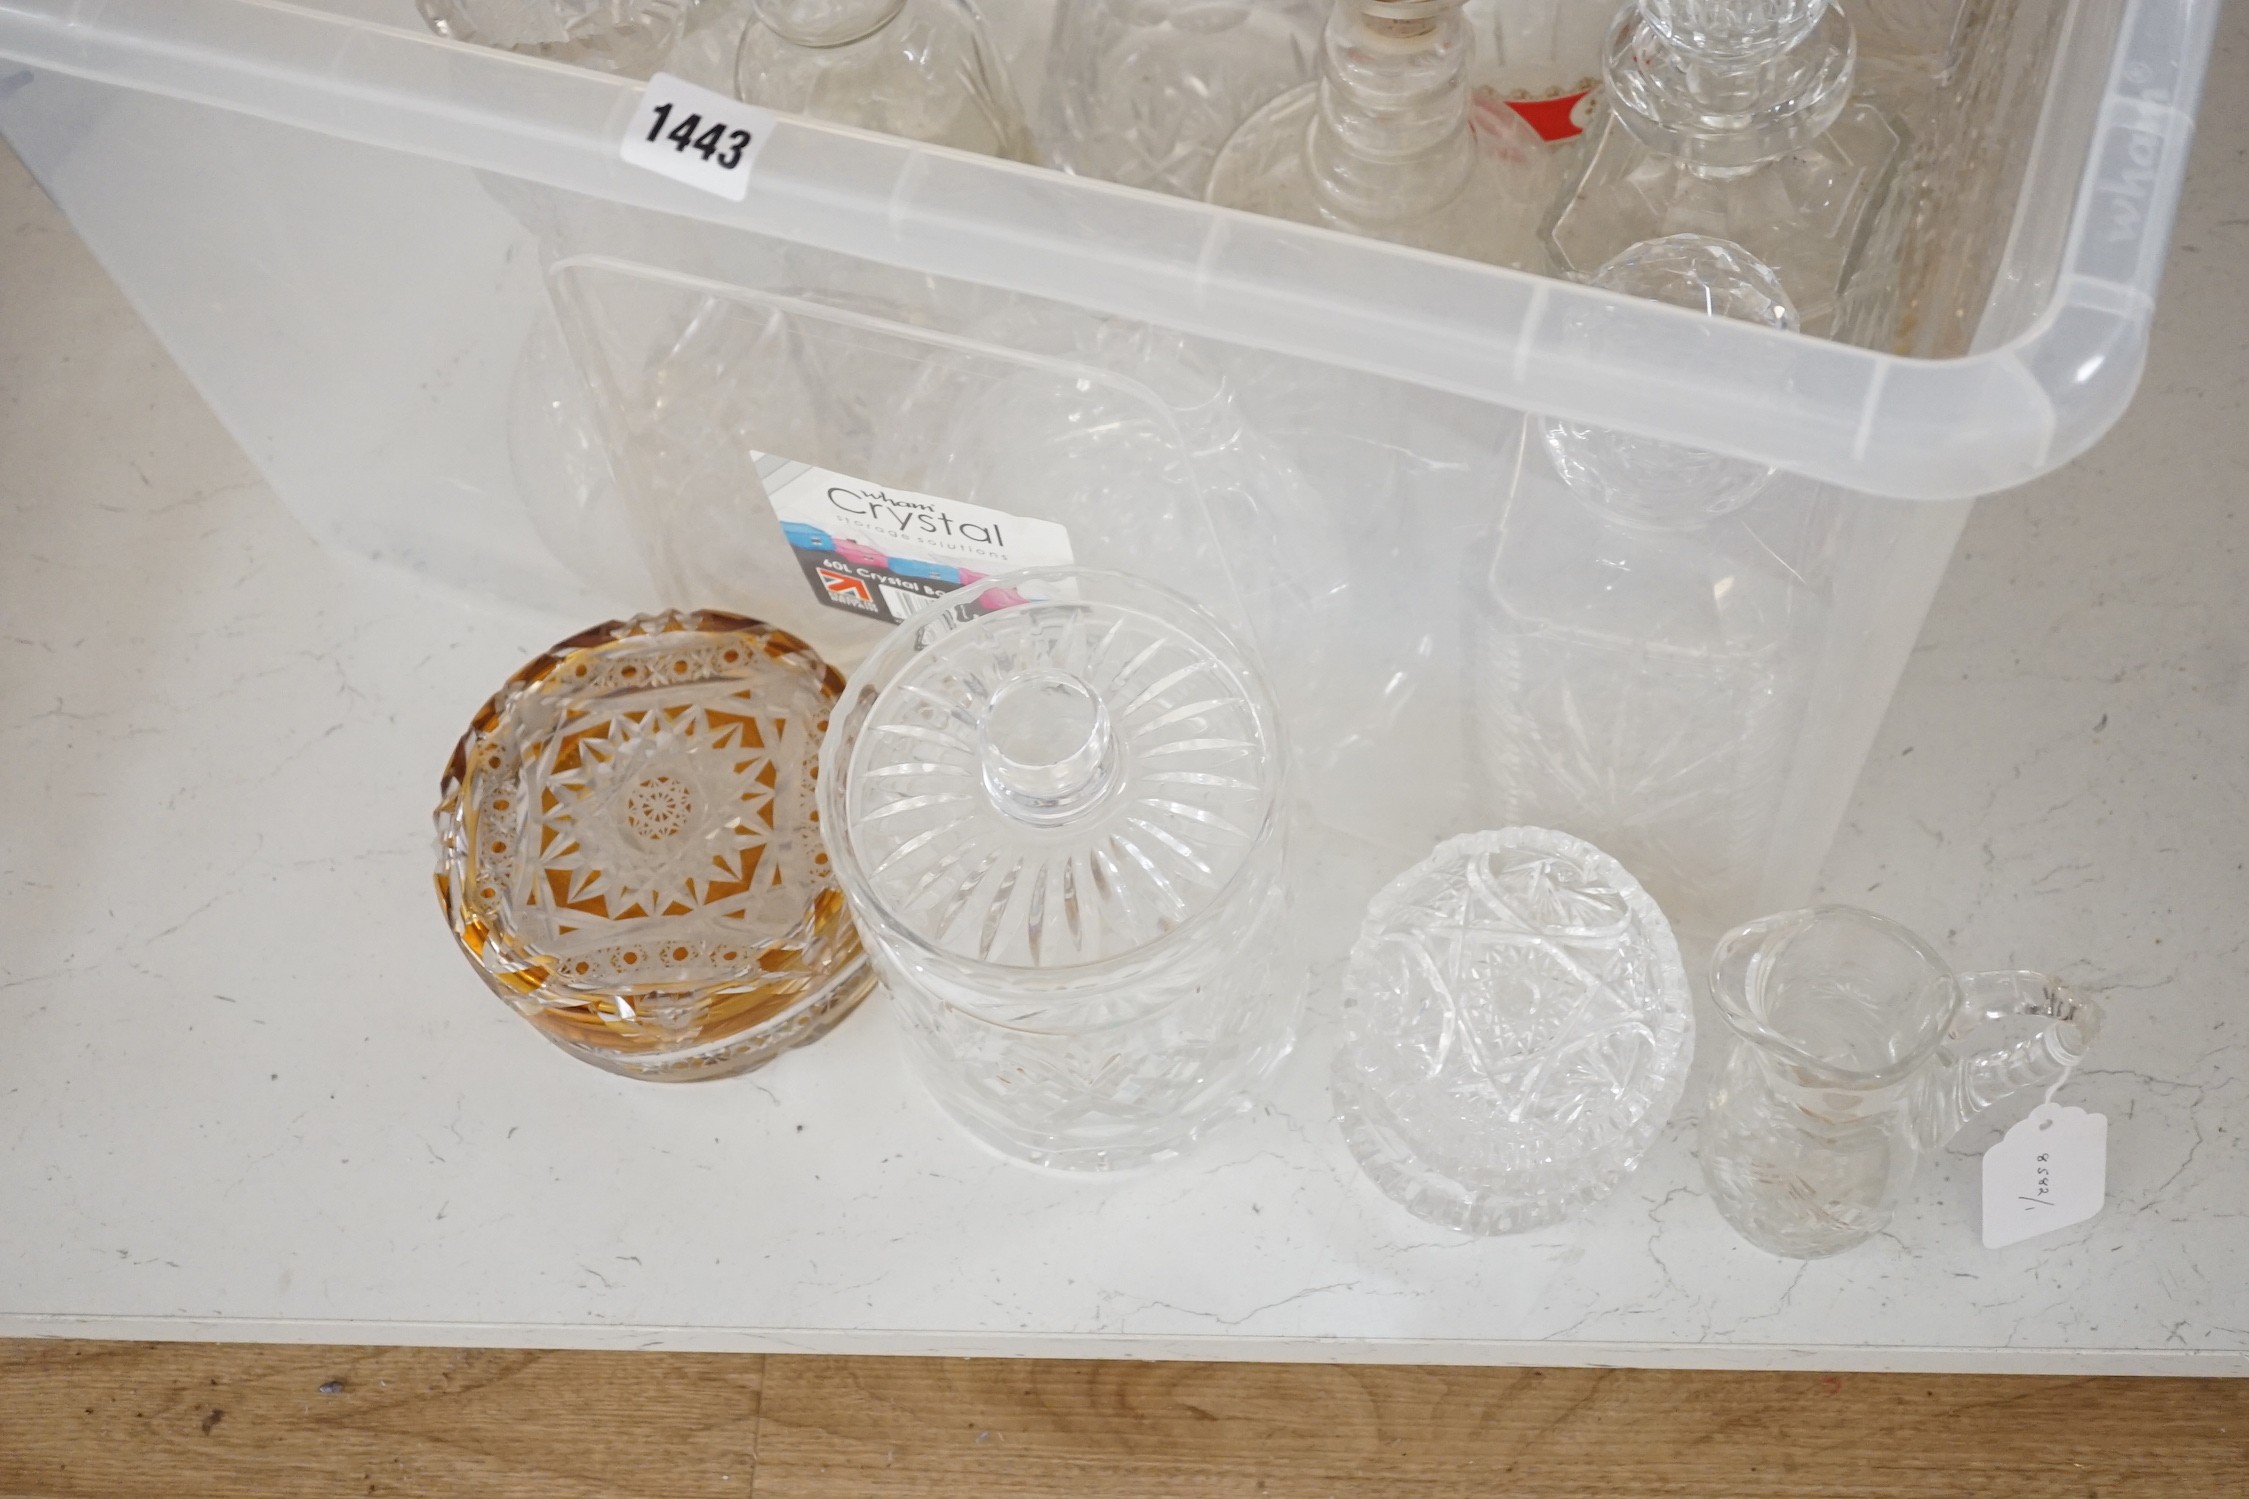 A quantity of household glassware